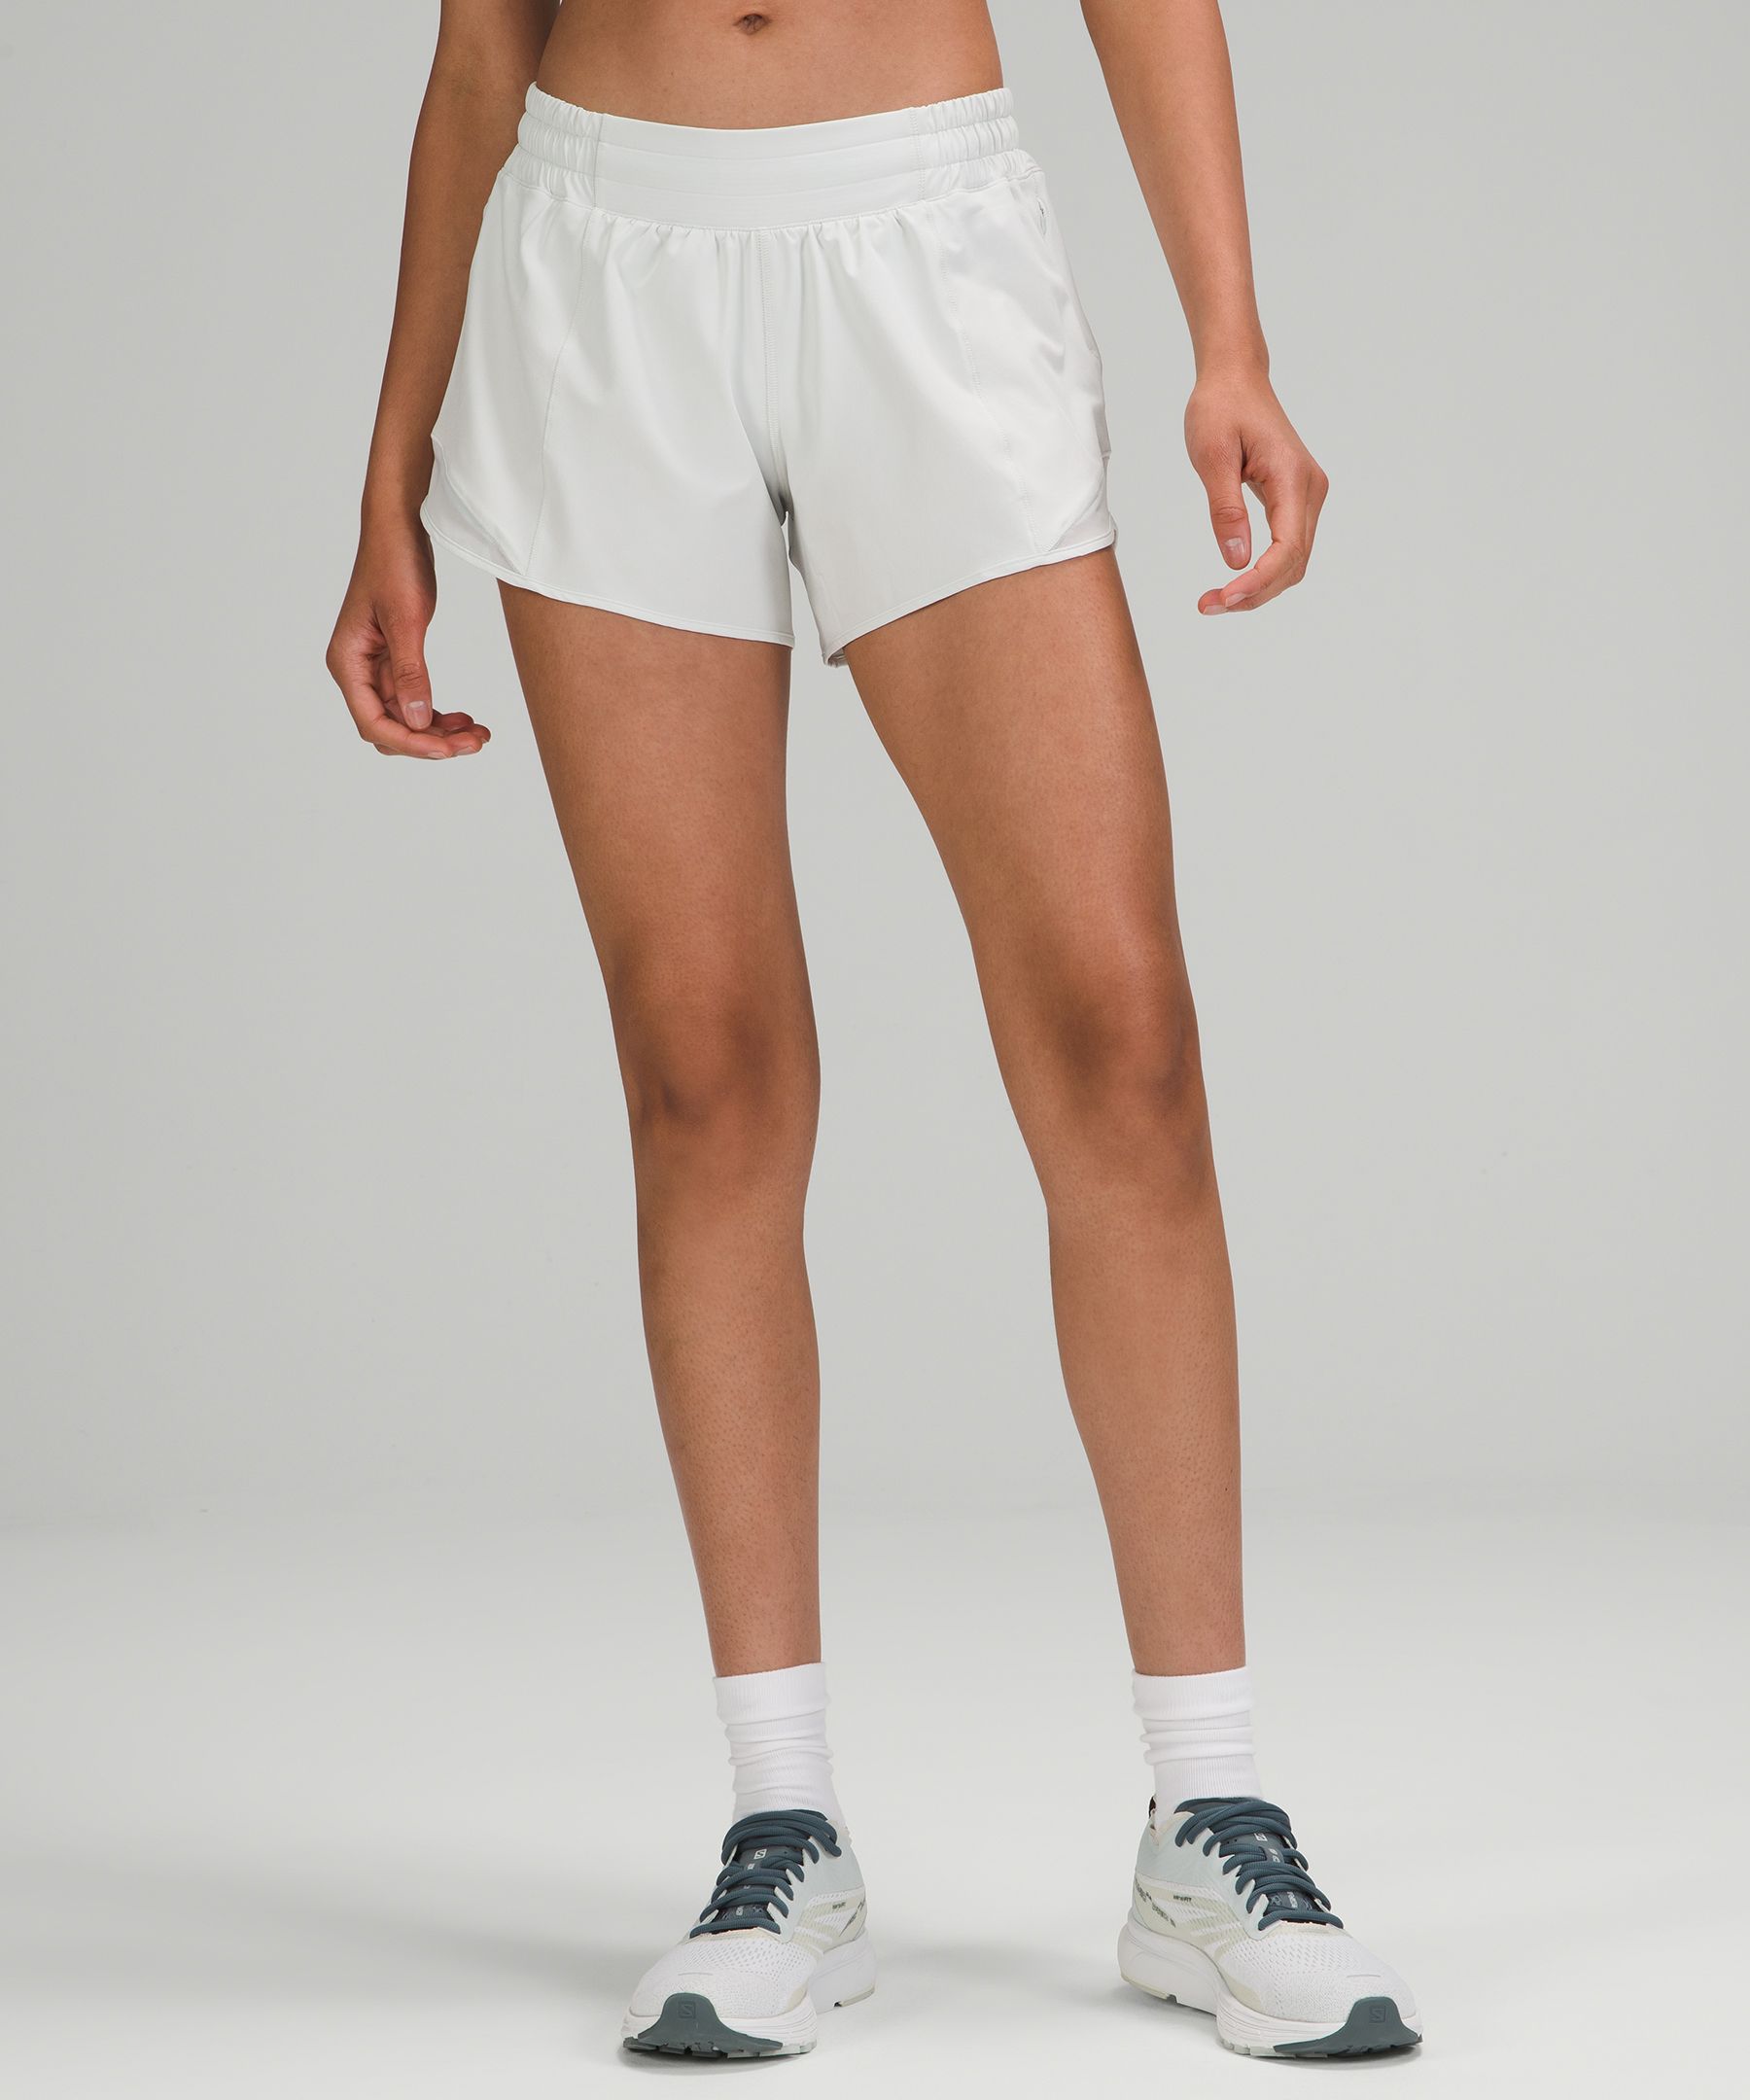 Lululemon Hotty Hot Low-rise Lined Shorts 4" In Ocean Air